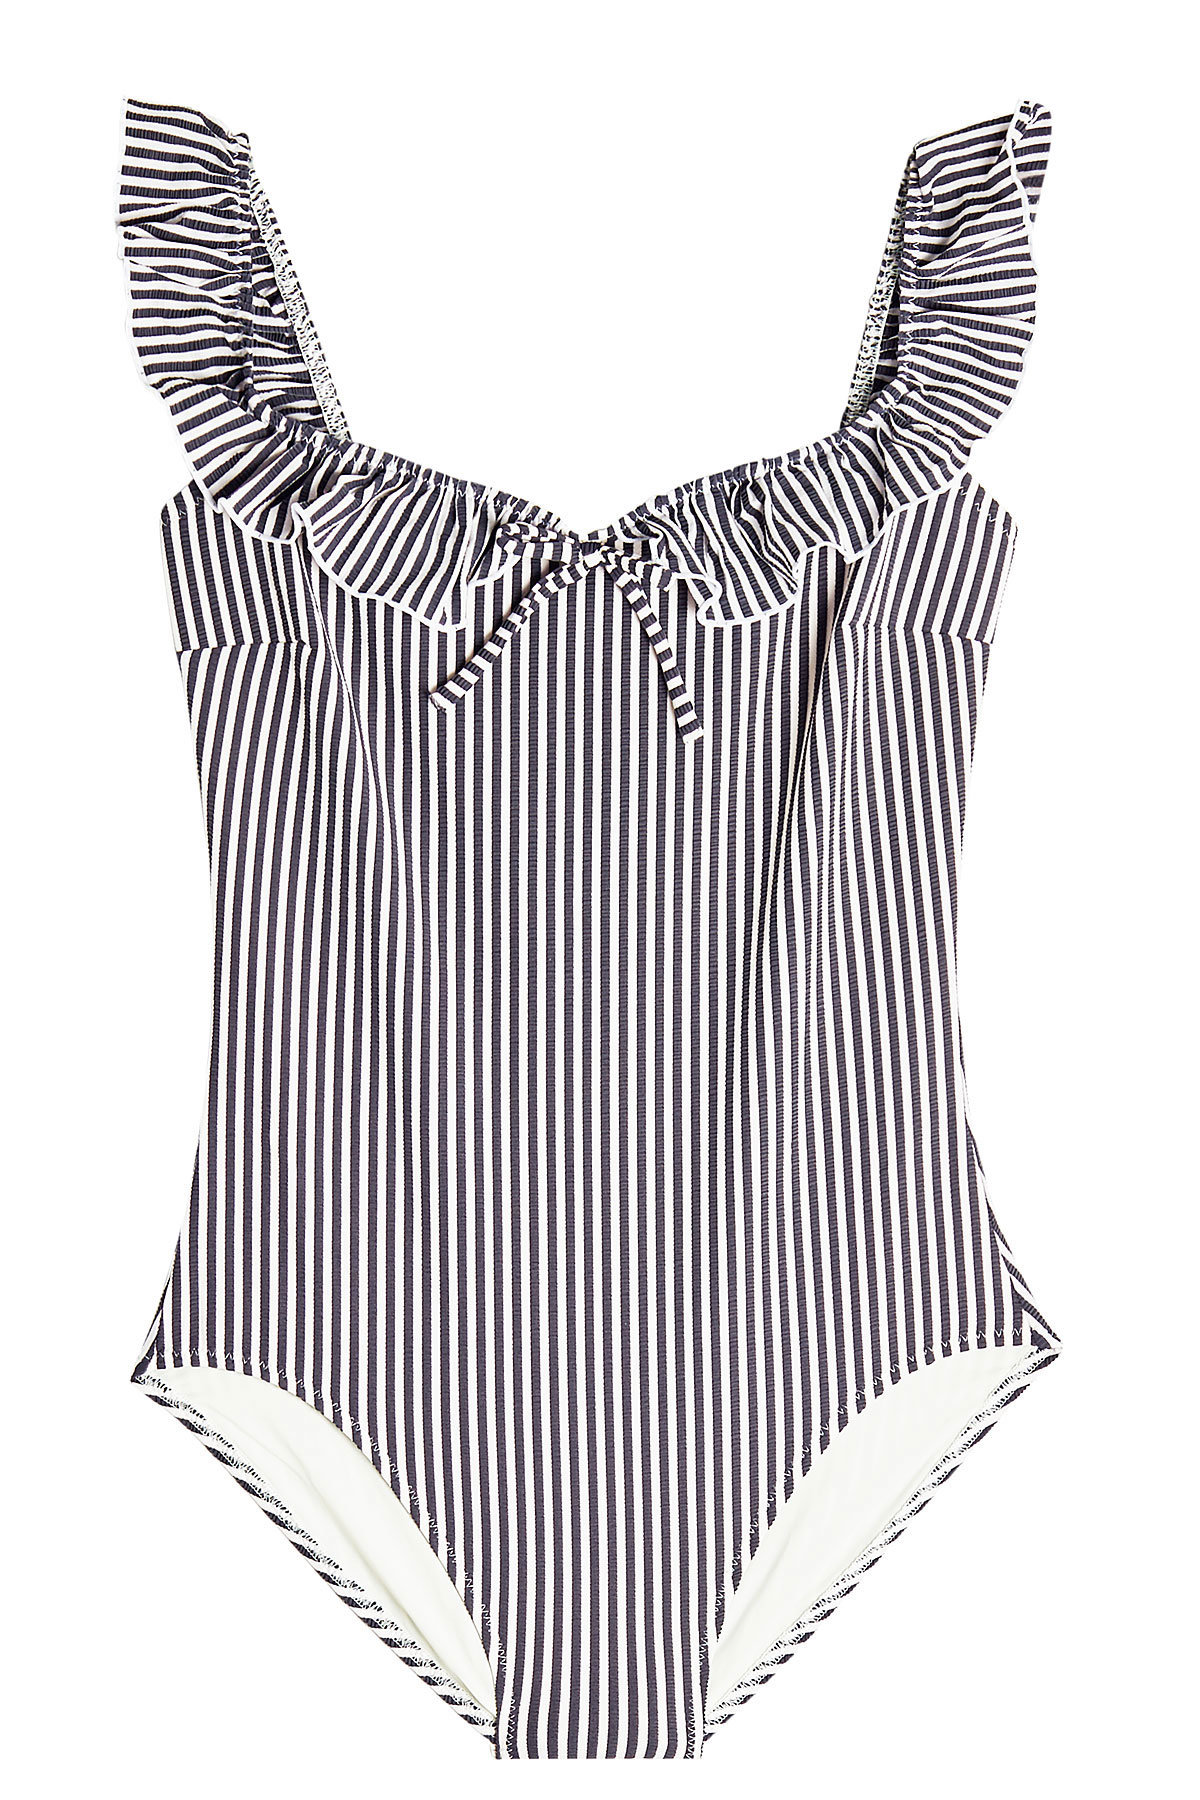 Solid & Striped - The Amelia Swimsuit